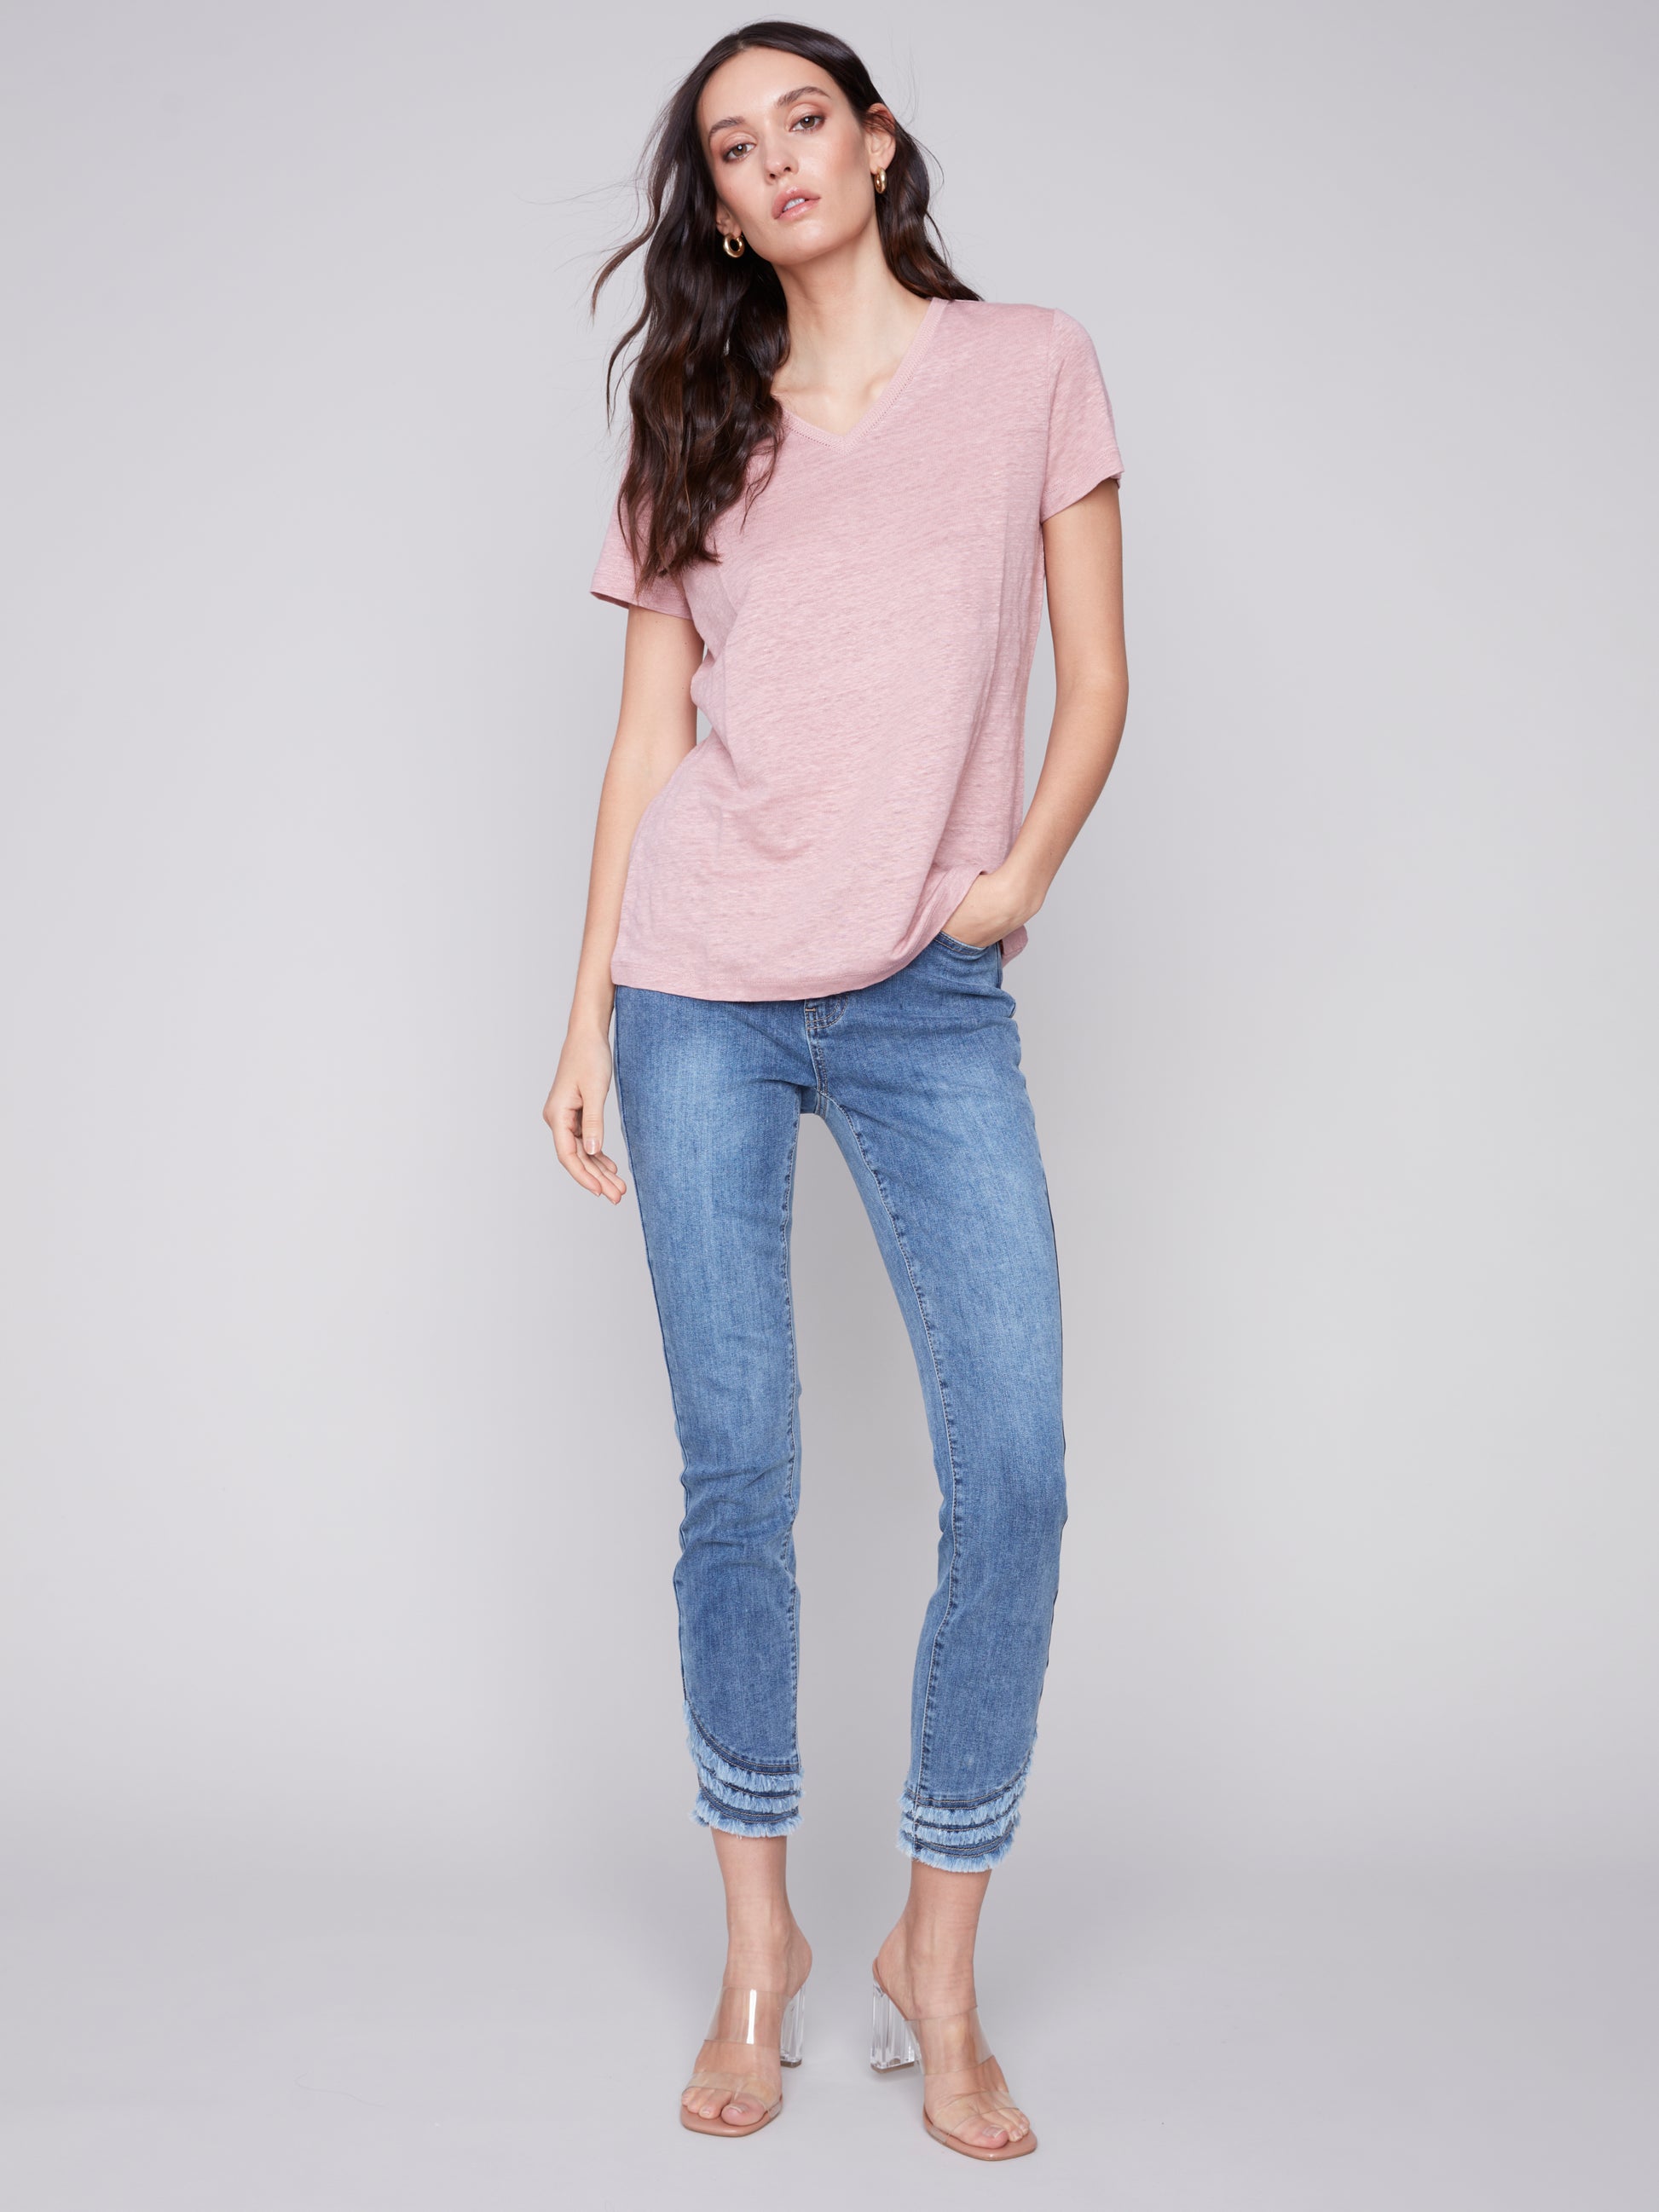 The model is wearing a pink Charlie B Linen V Neck T-Shirt, showcasing its versatility.